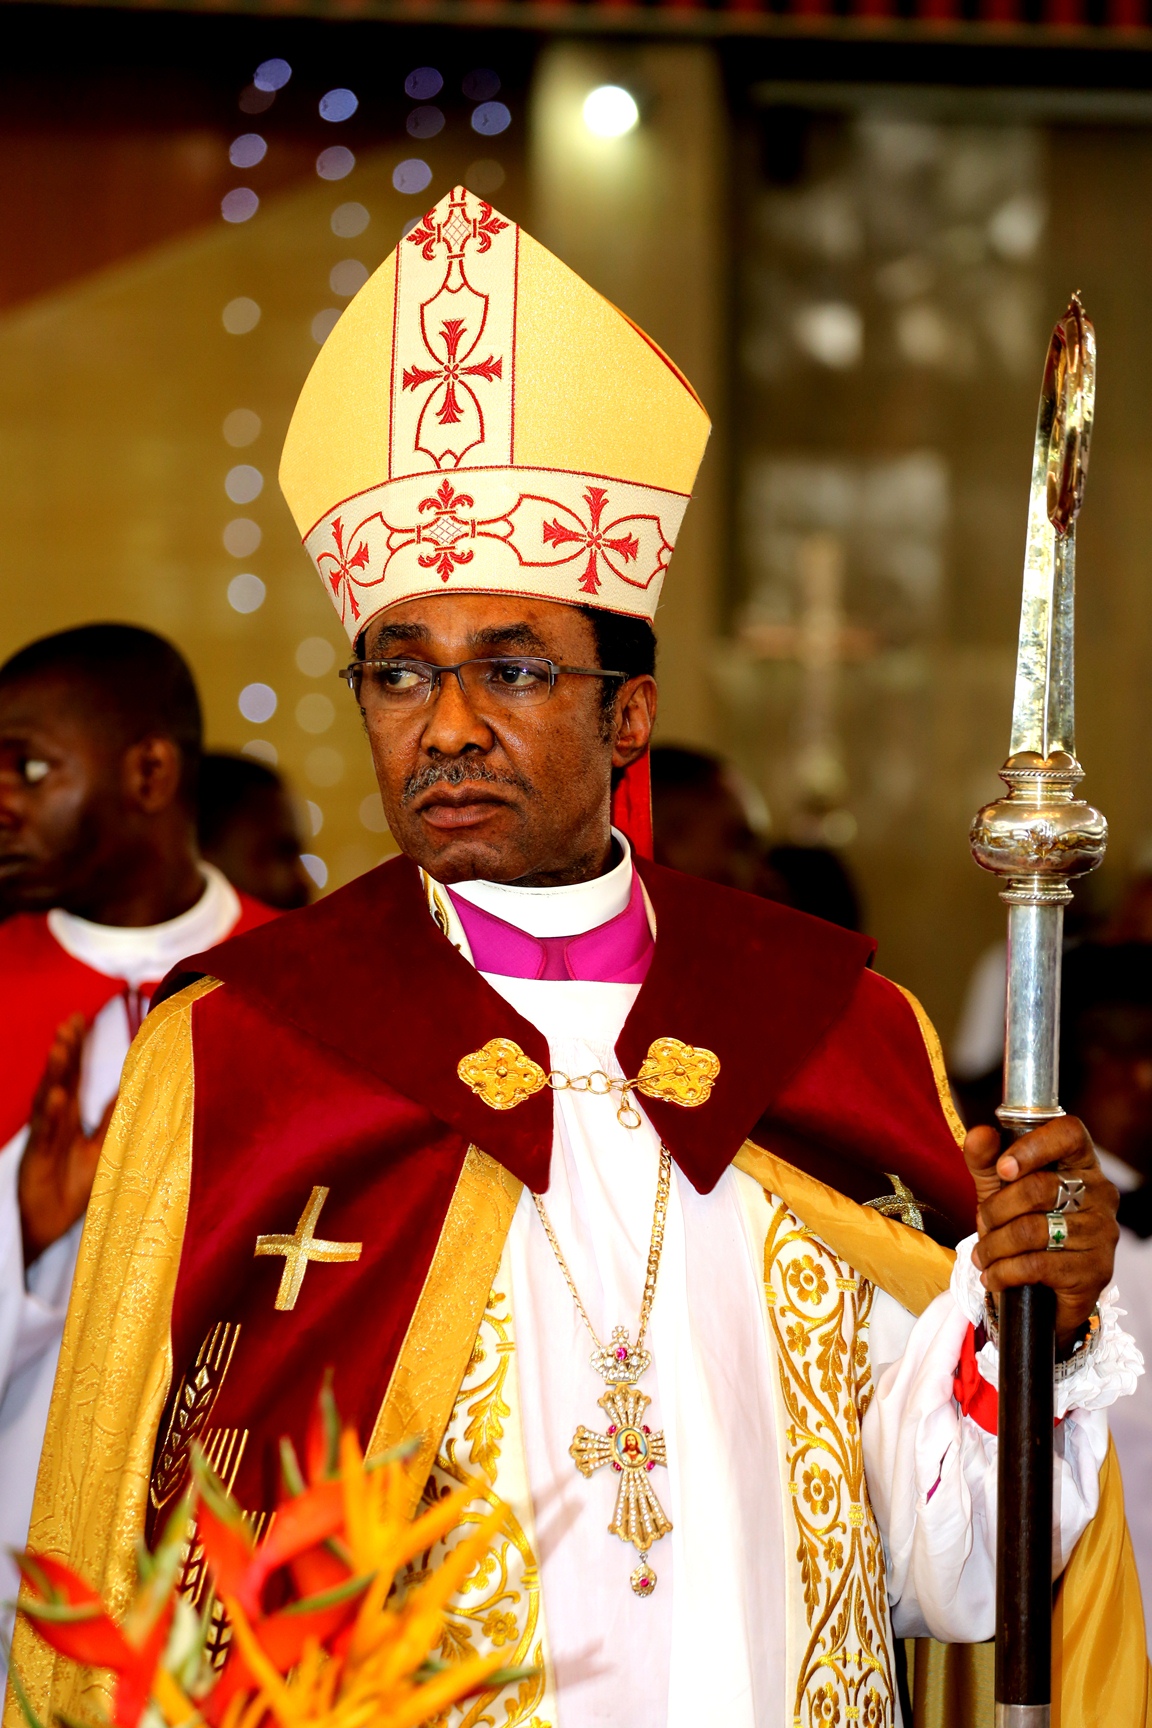 Archbishop Anglican Diocese, Enugu vows not to stop holding church services